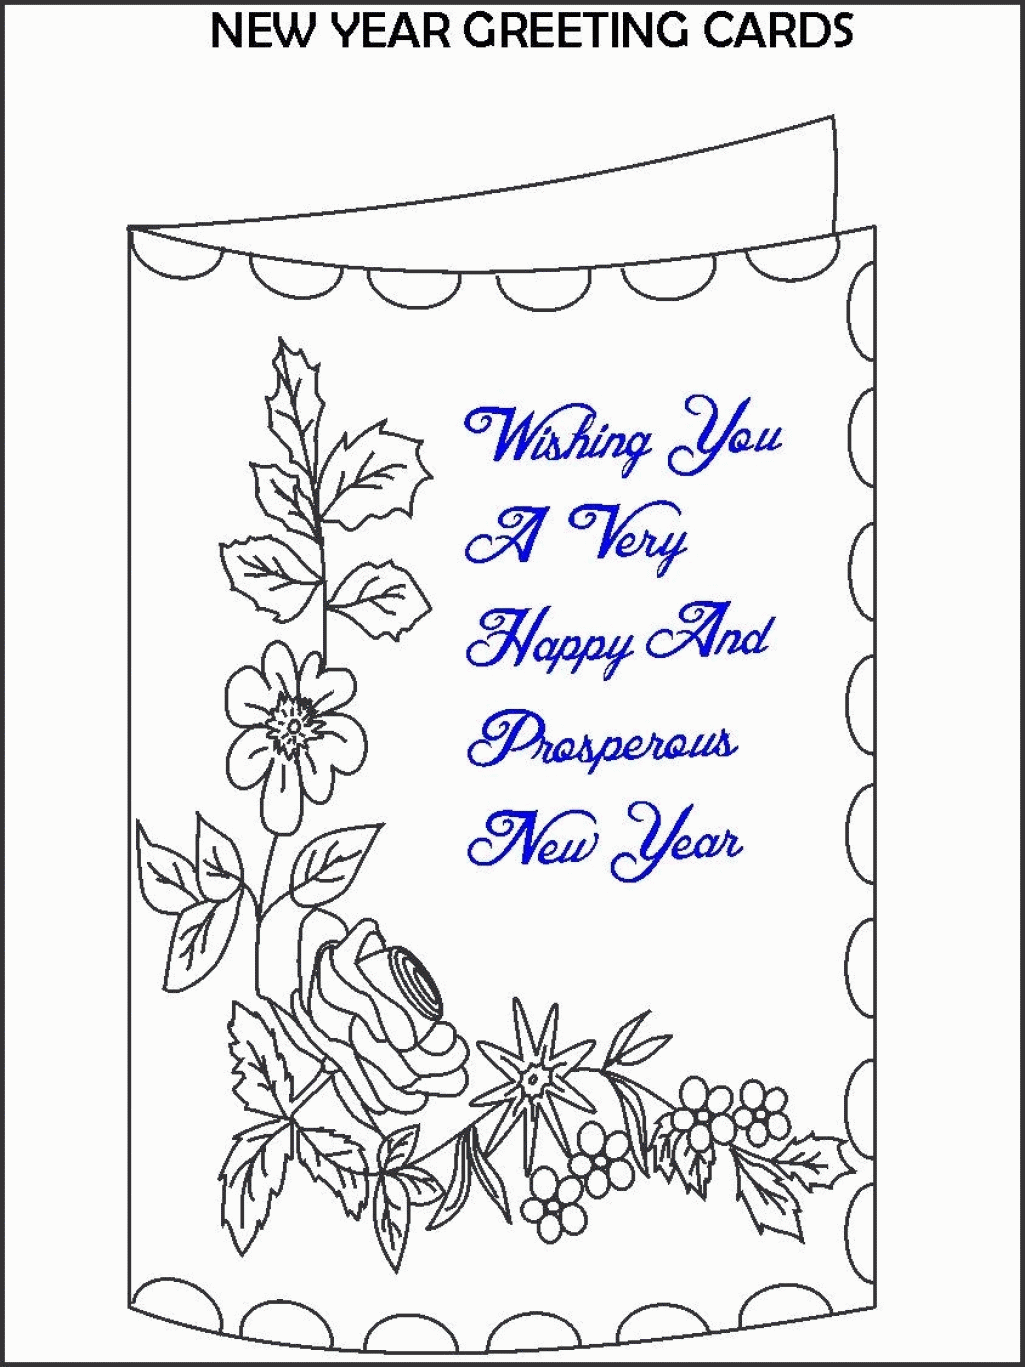 Christmas Card Coloring Pages Free - Coloring Home